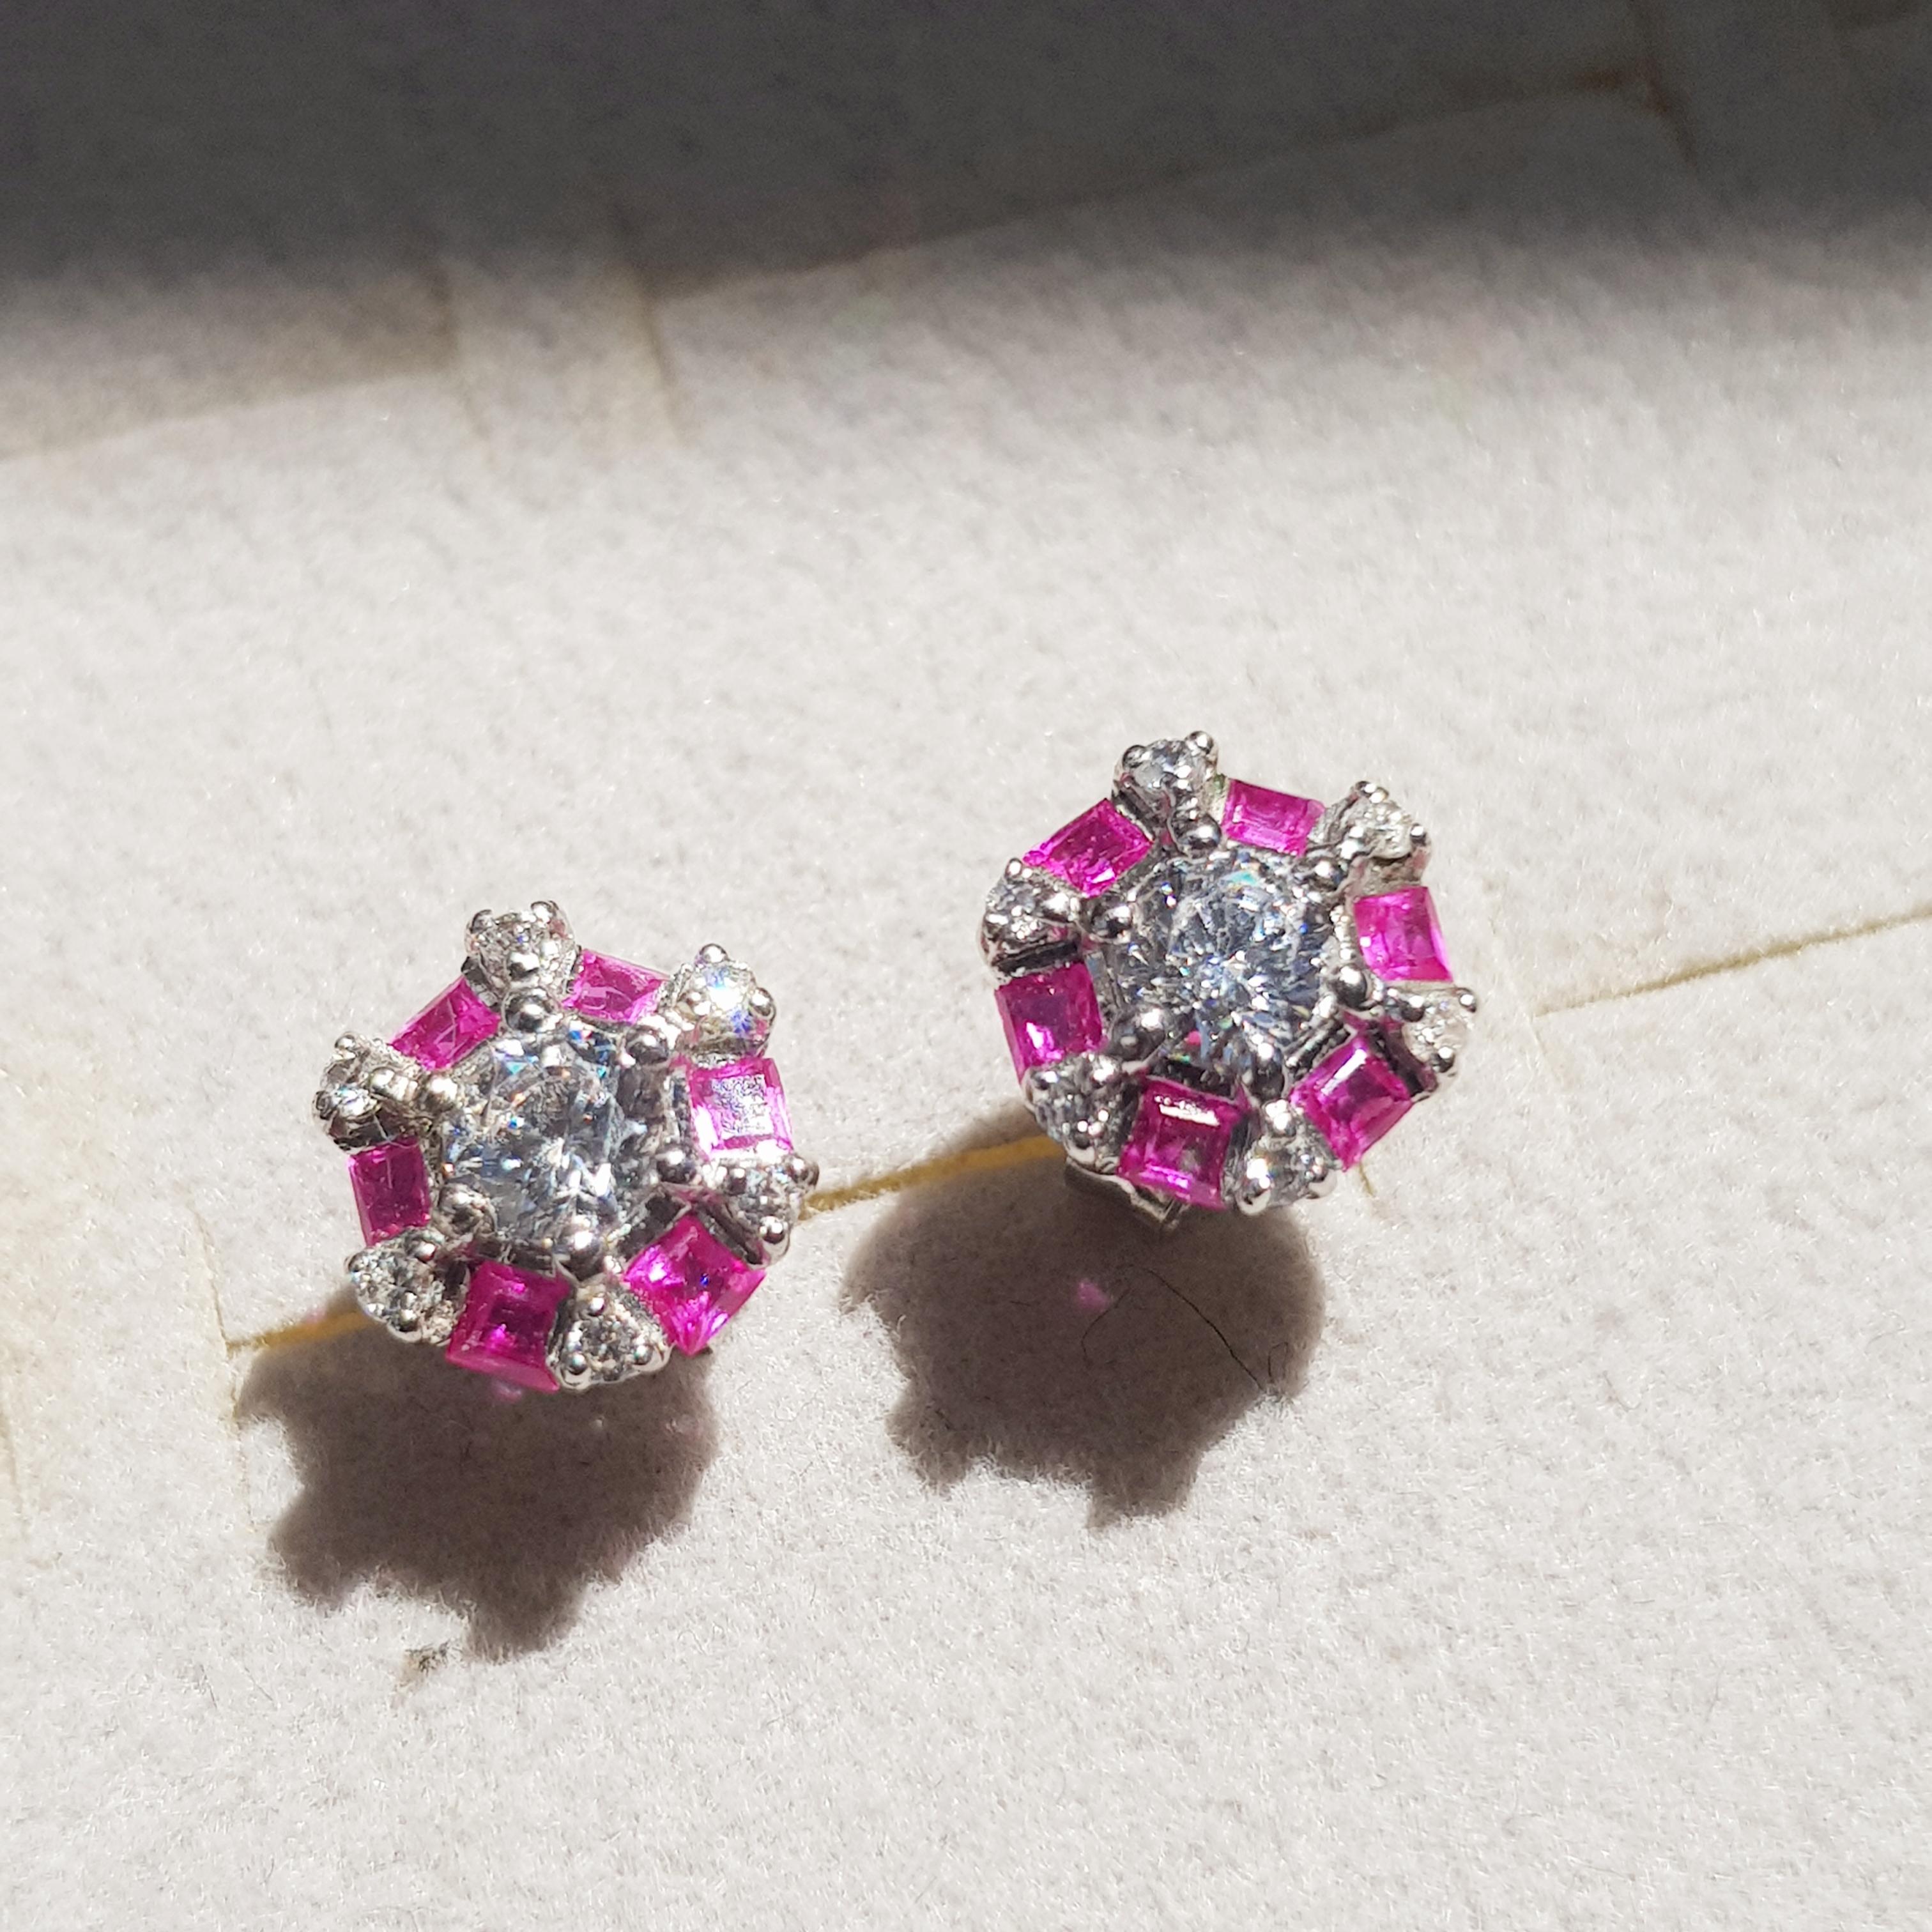 These stunning diamond and ruby earrings feature an Art Deco design, centered with a round cut diamond in a six-prong setting. The center is surrounded by six baguette cut rubies and six round diamonds. Signed spark!

Information
Style: Art